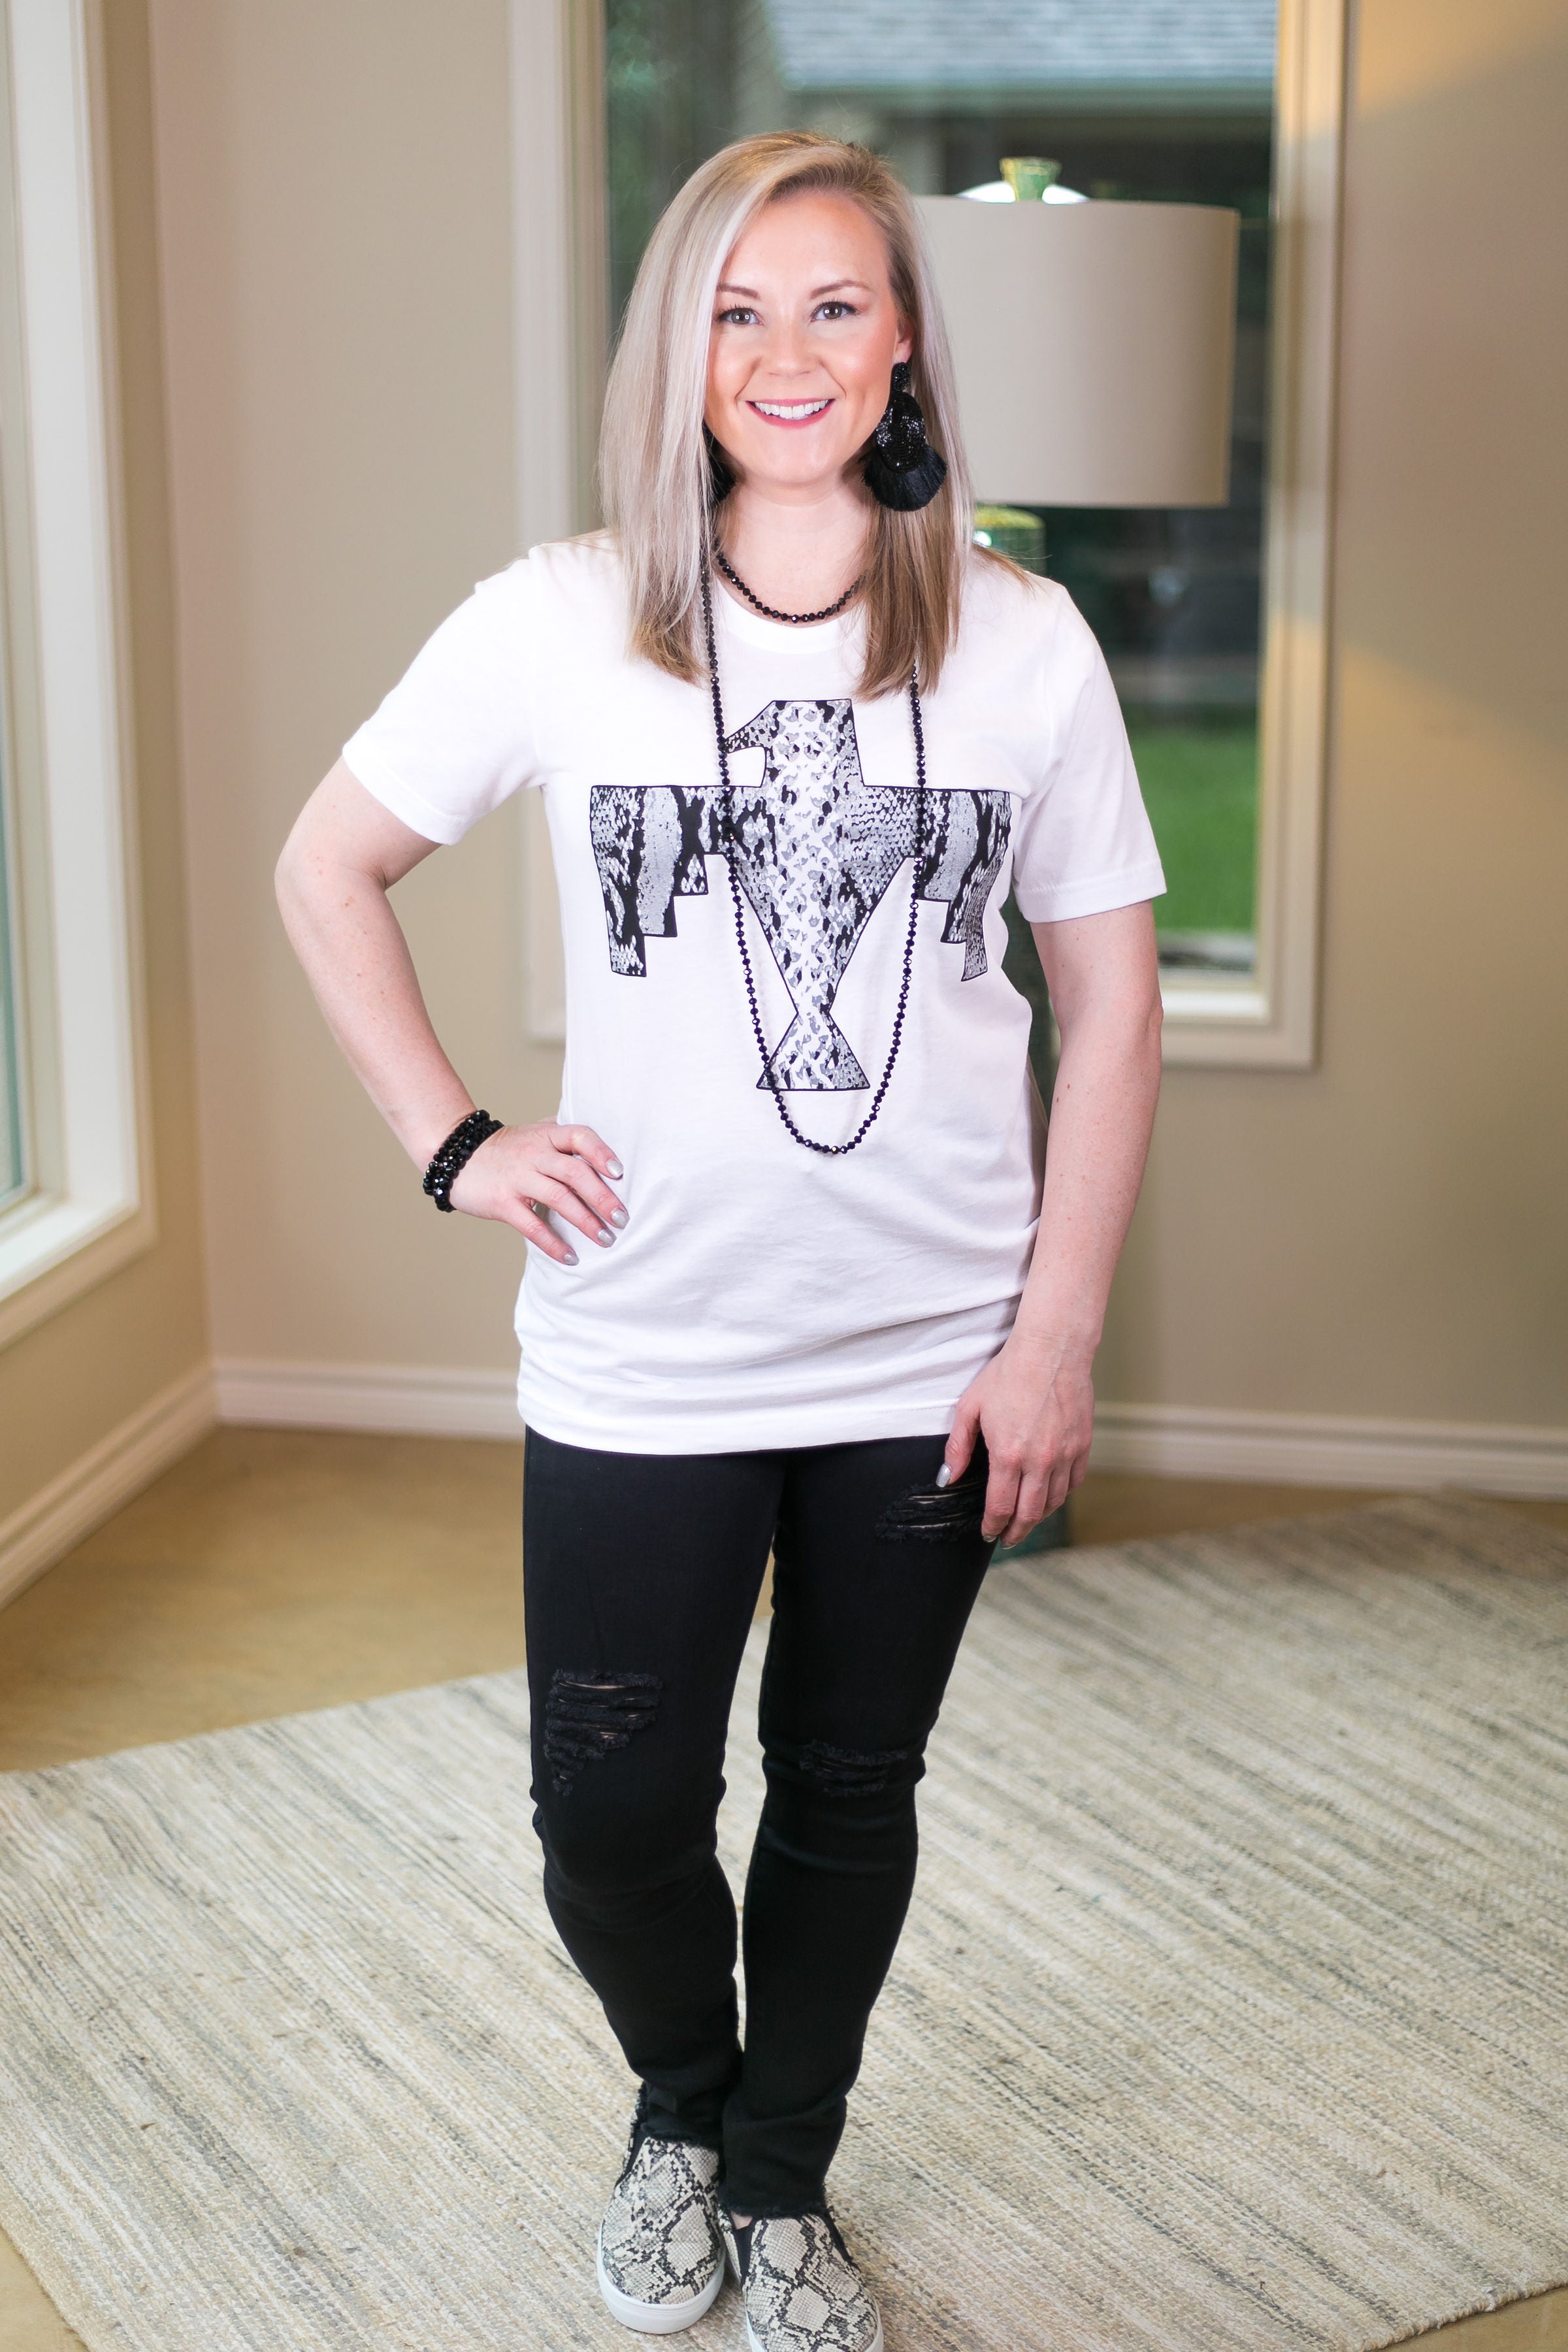 Last Chance Size 3XL | Keep Her Wild Snakeskin Thunderbird Graphic Short Sleeve Tee Shirt in White - Giddy Up Glamour Boutique